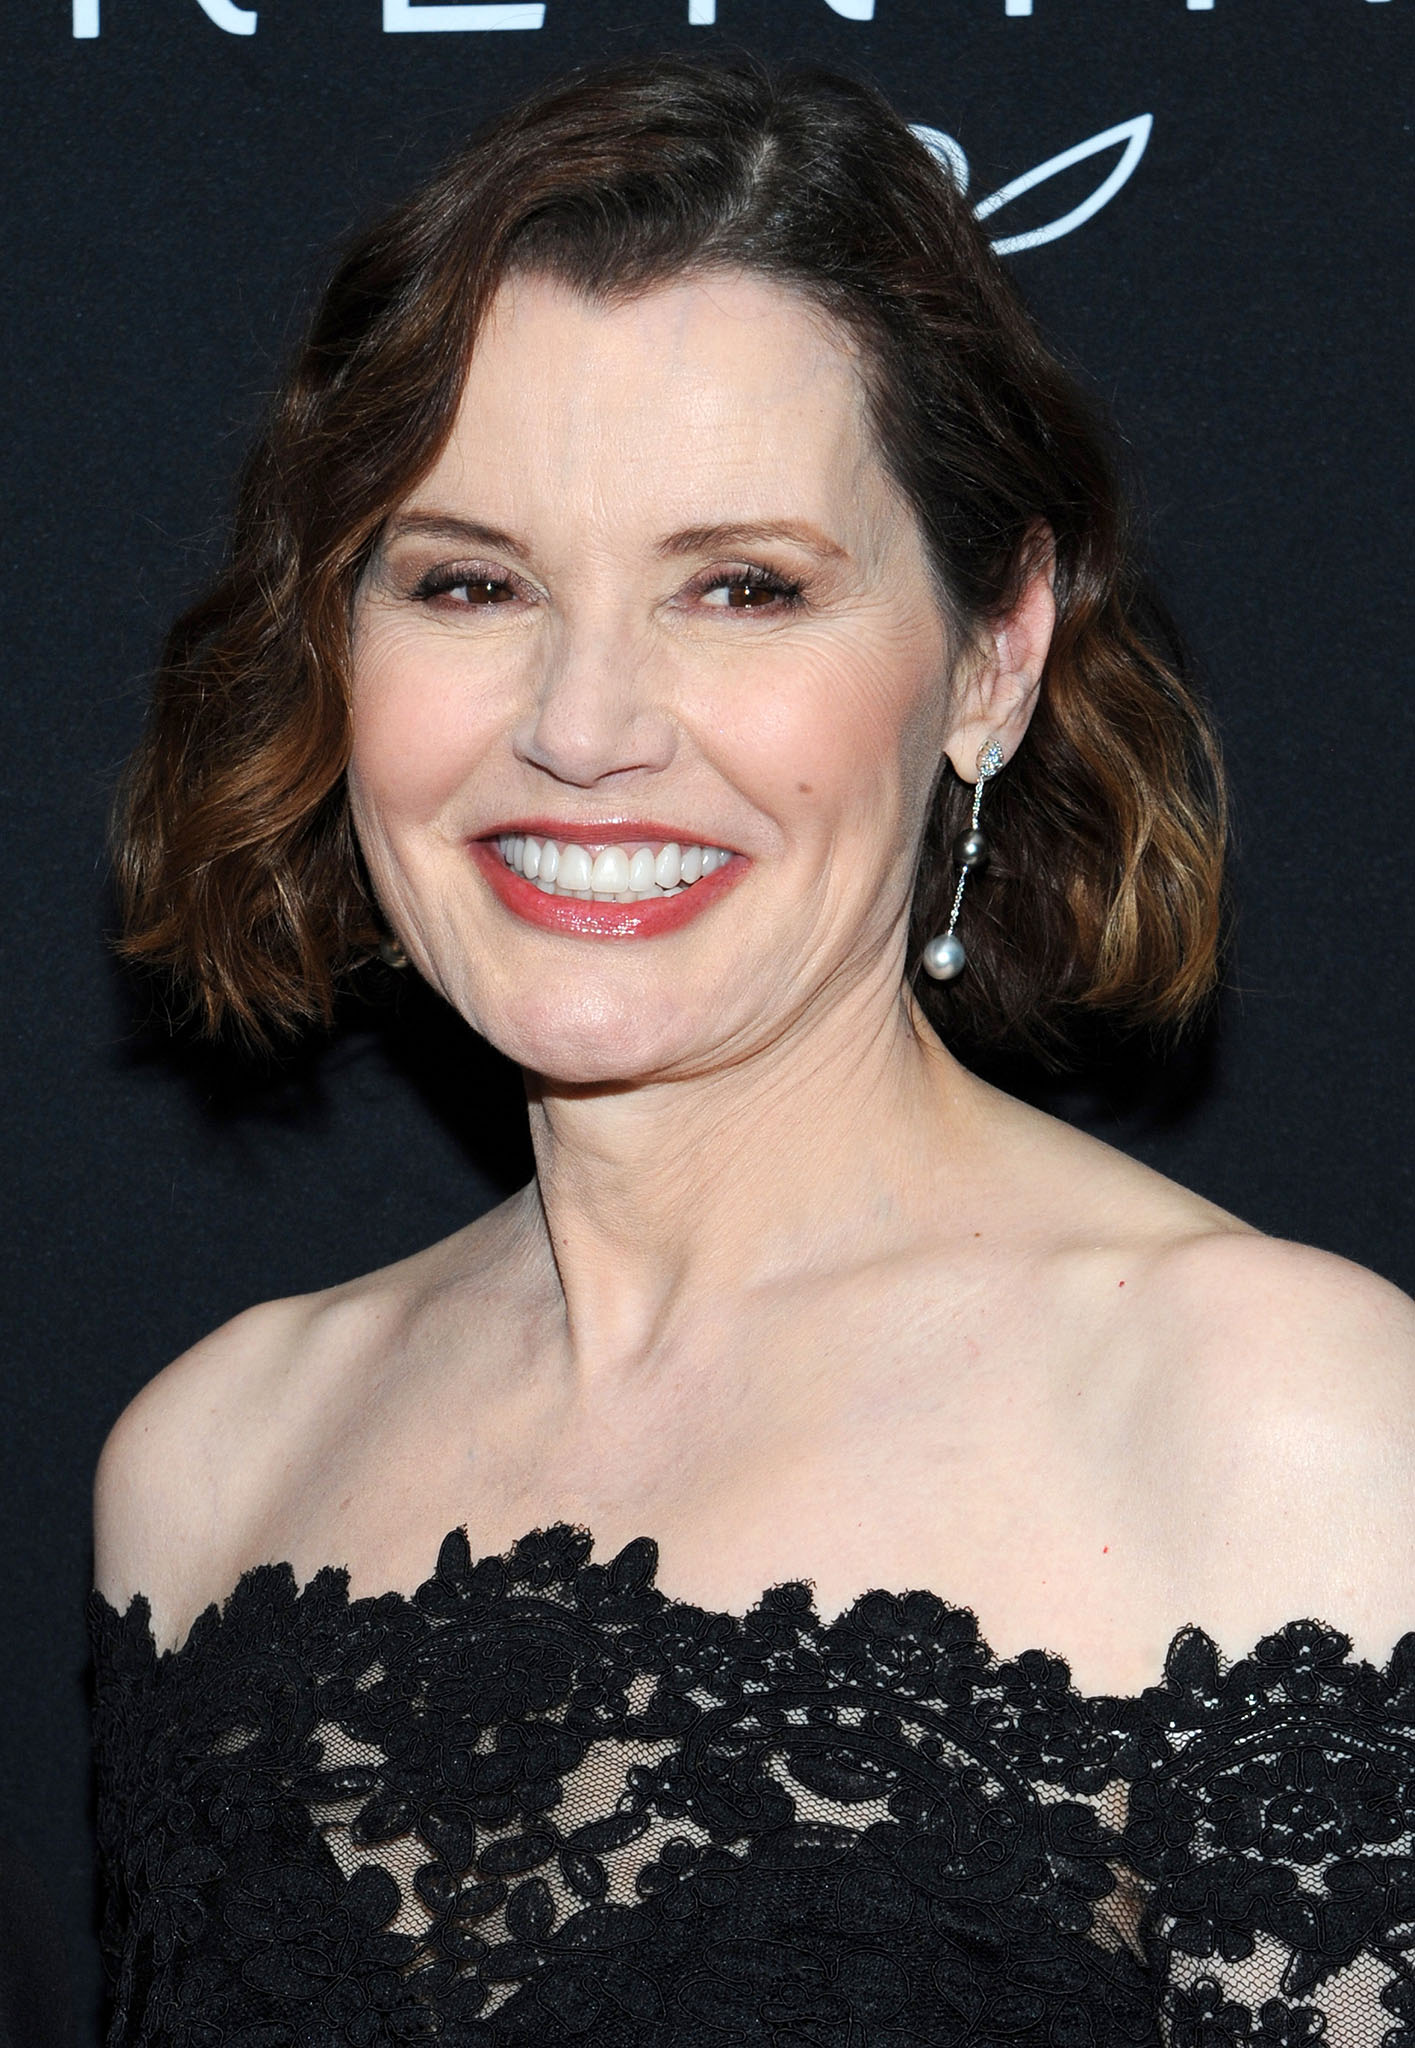 Geena Davis, pictured at Kering's Women In Motion special screening of Thelma & Louise on January 28, 2020, played Thelma in the movie